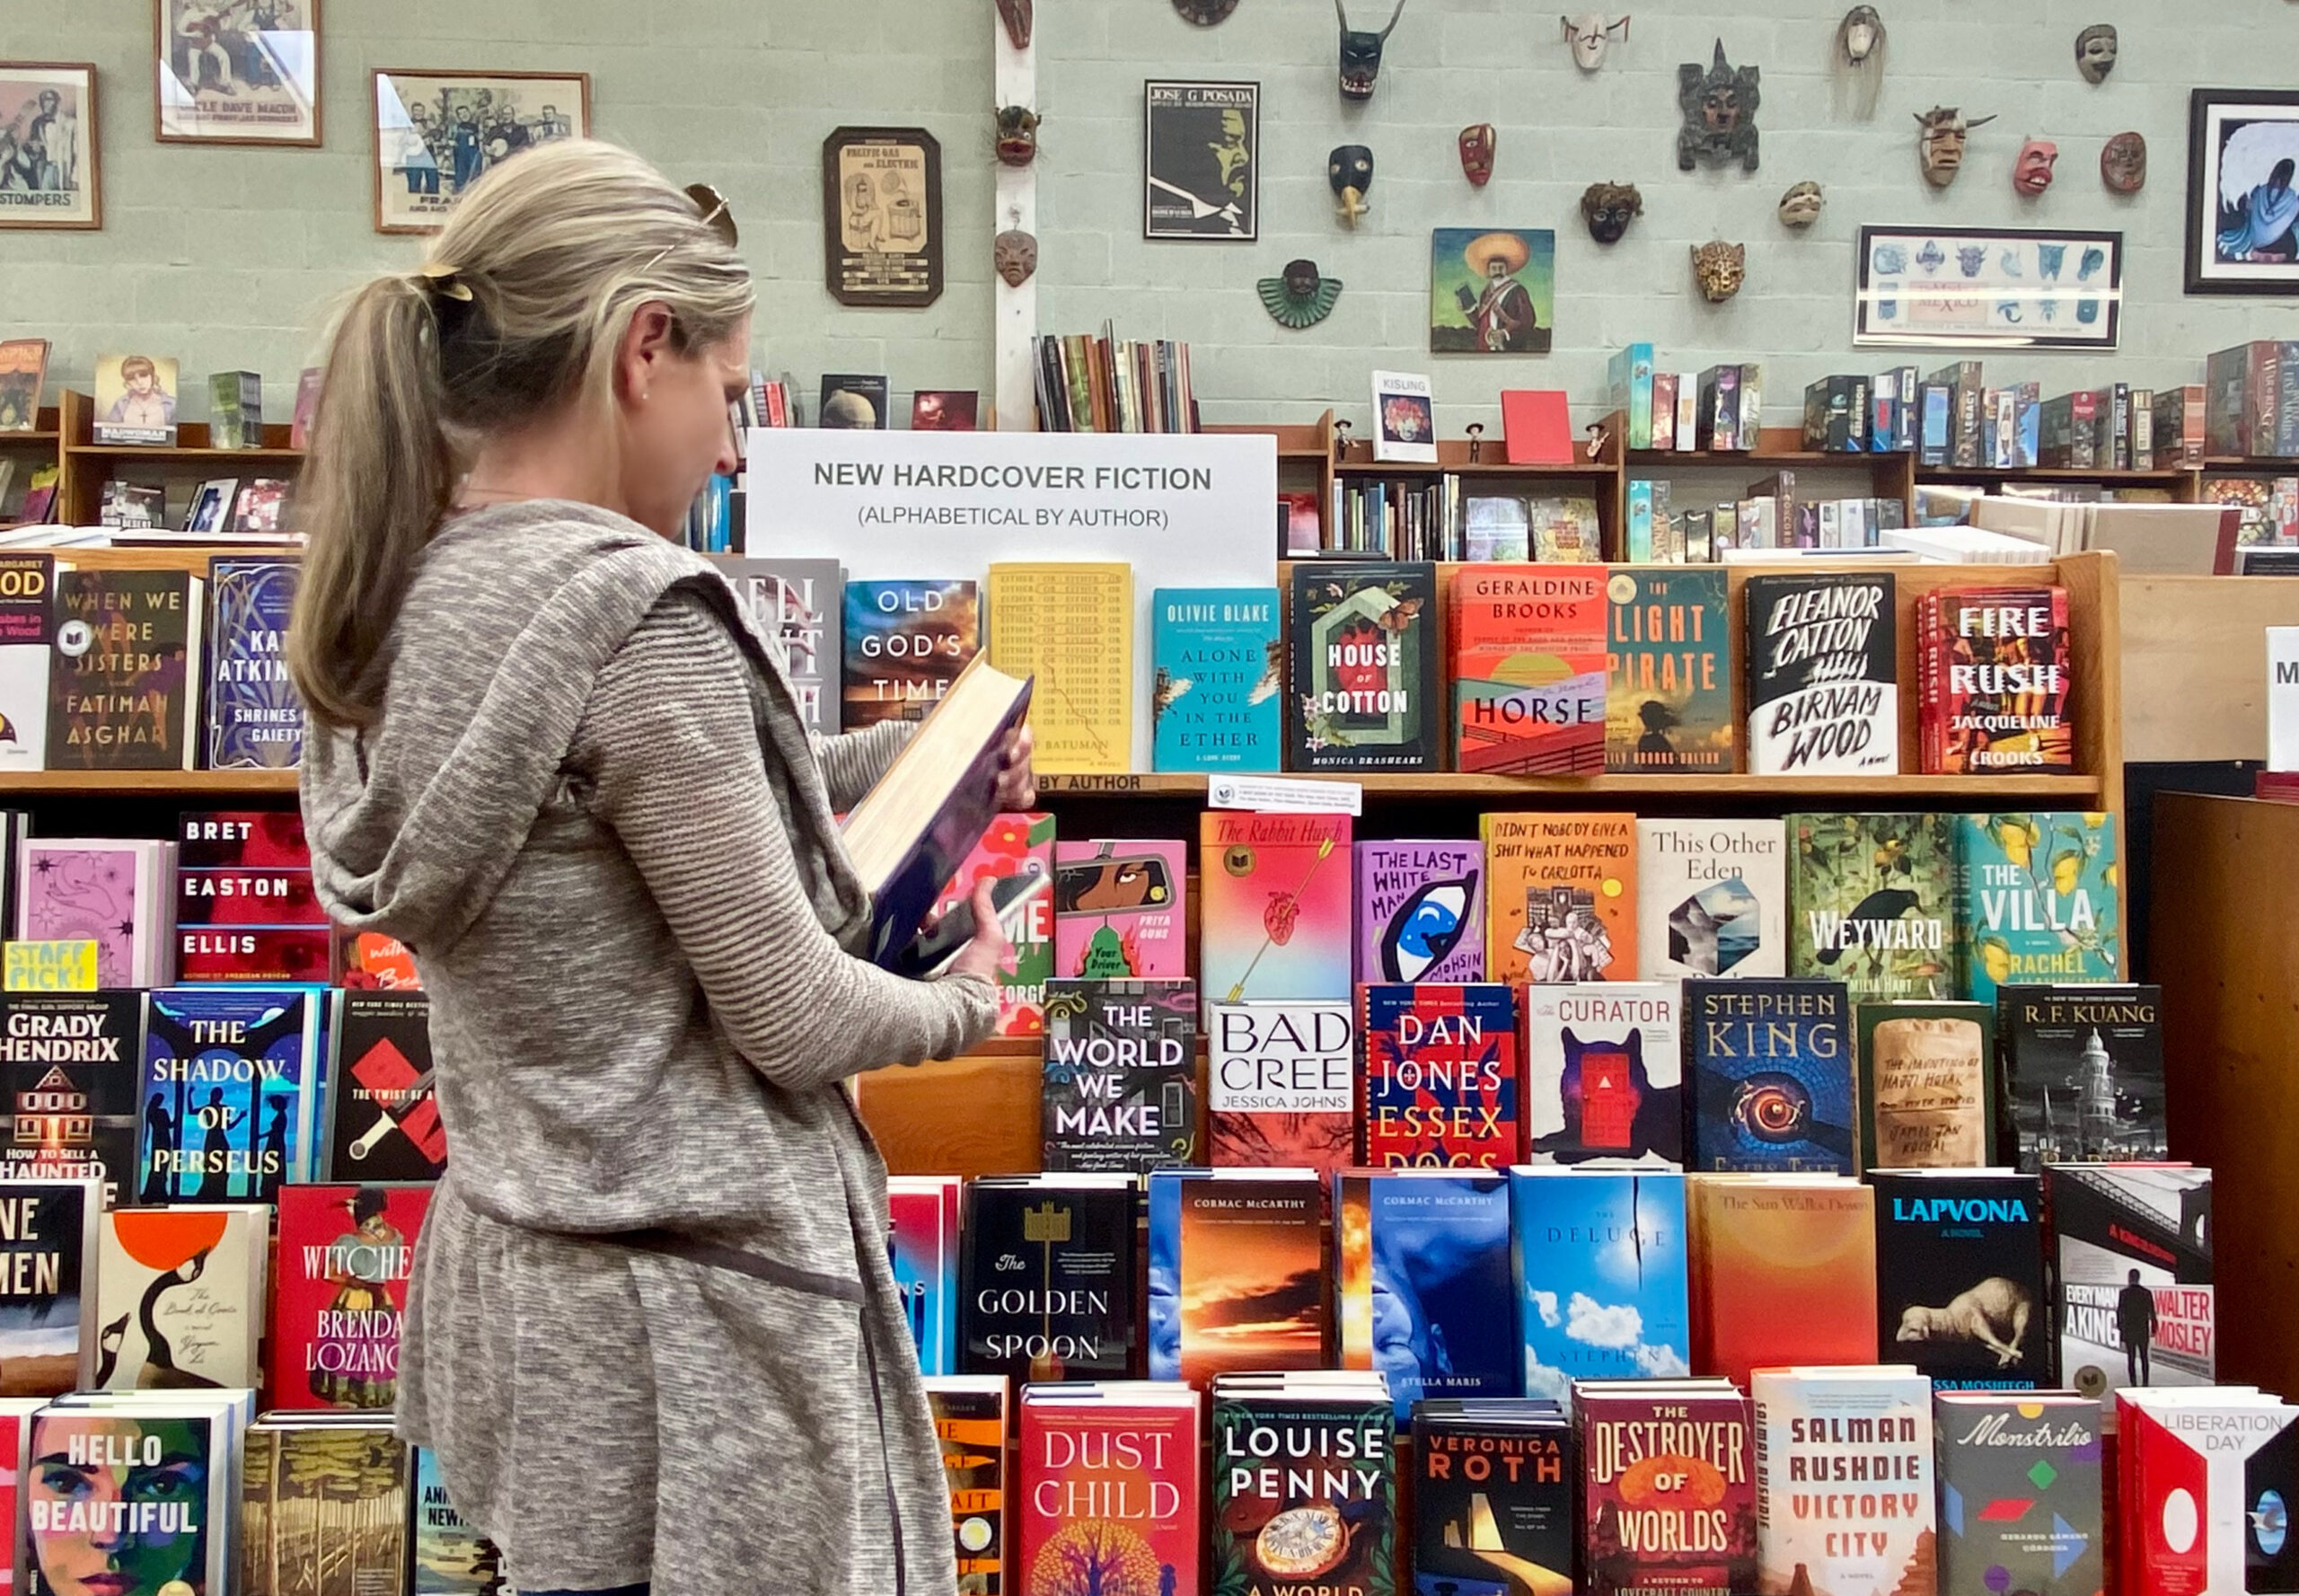 A woman browses for books in front of a book display.